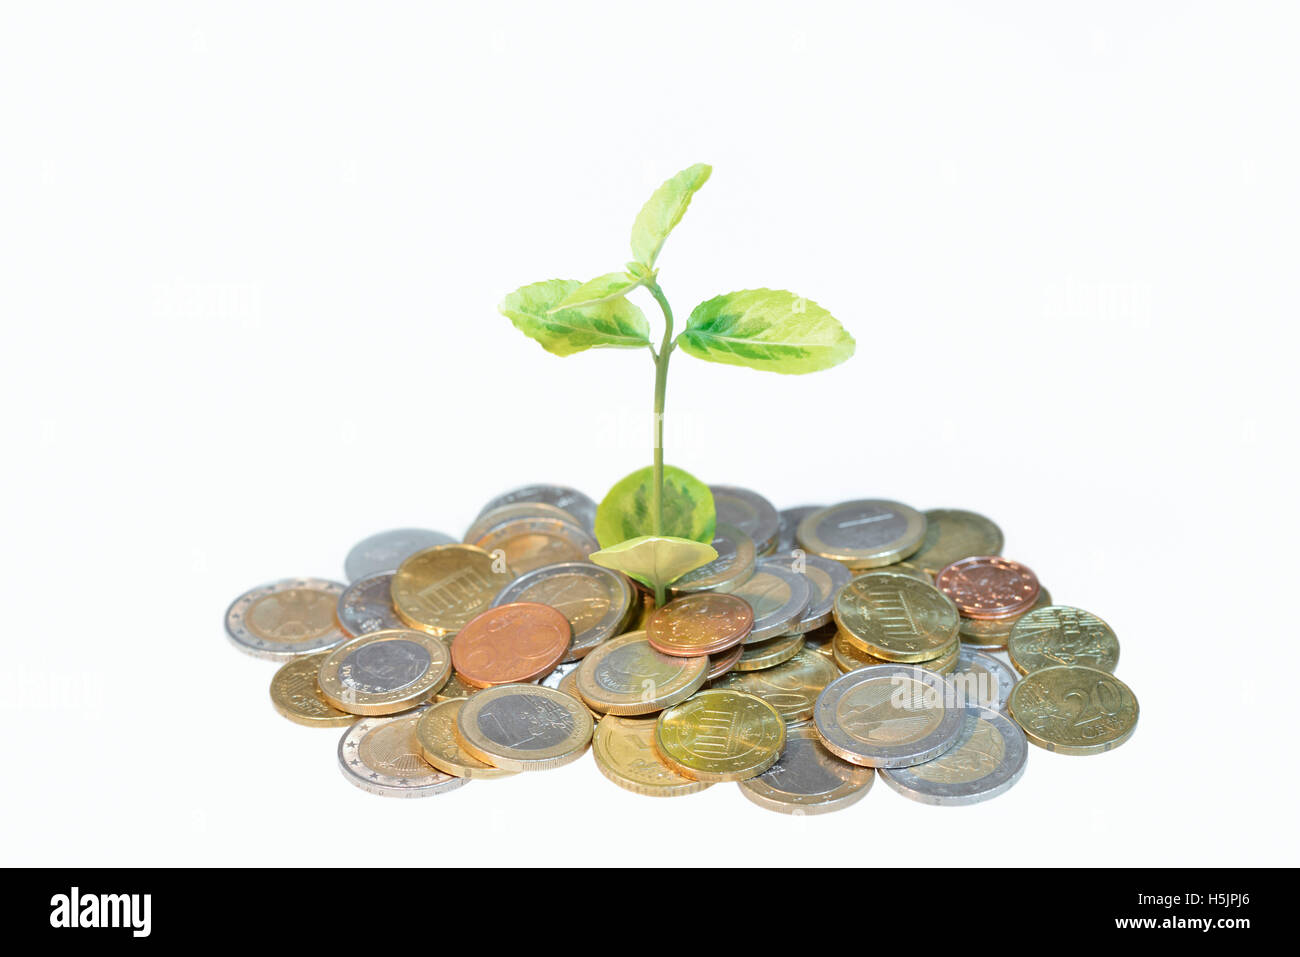 Seedling growing from a pile of coins Stock Photo